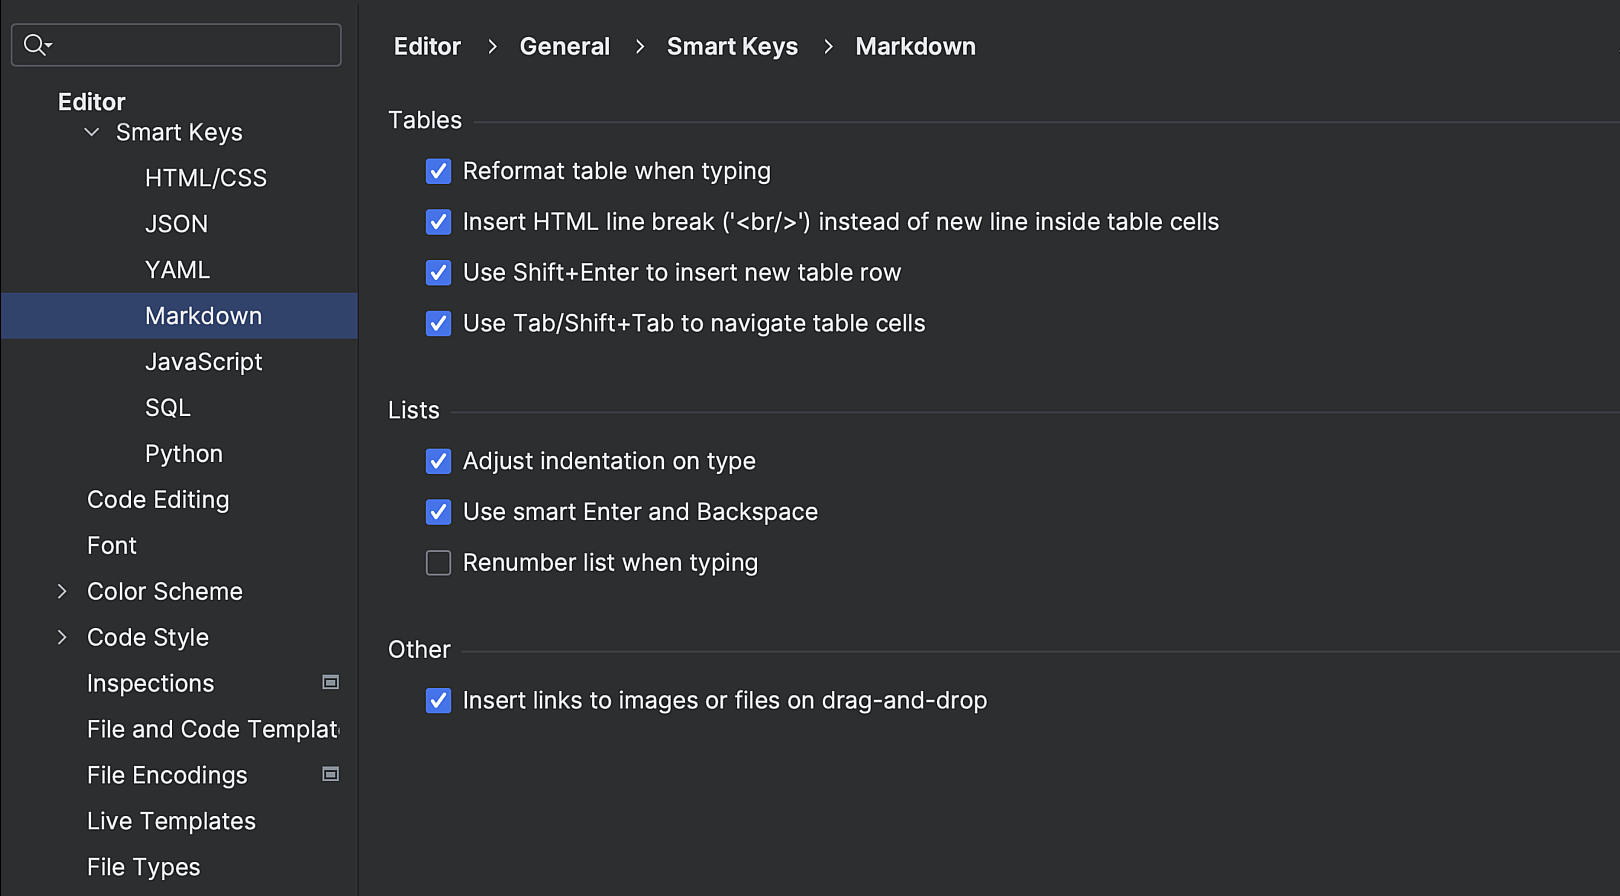 New Smart Keys settings page for Markdown